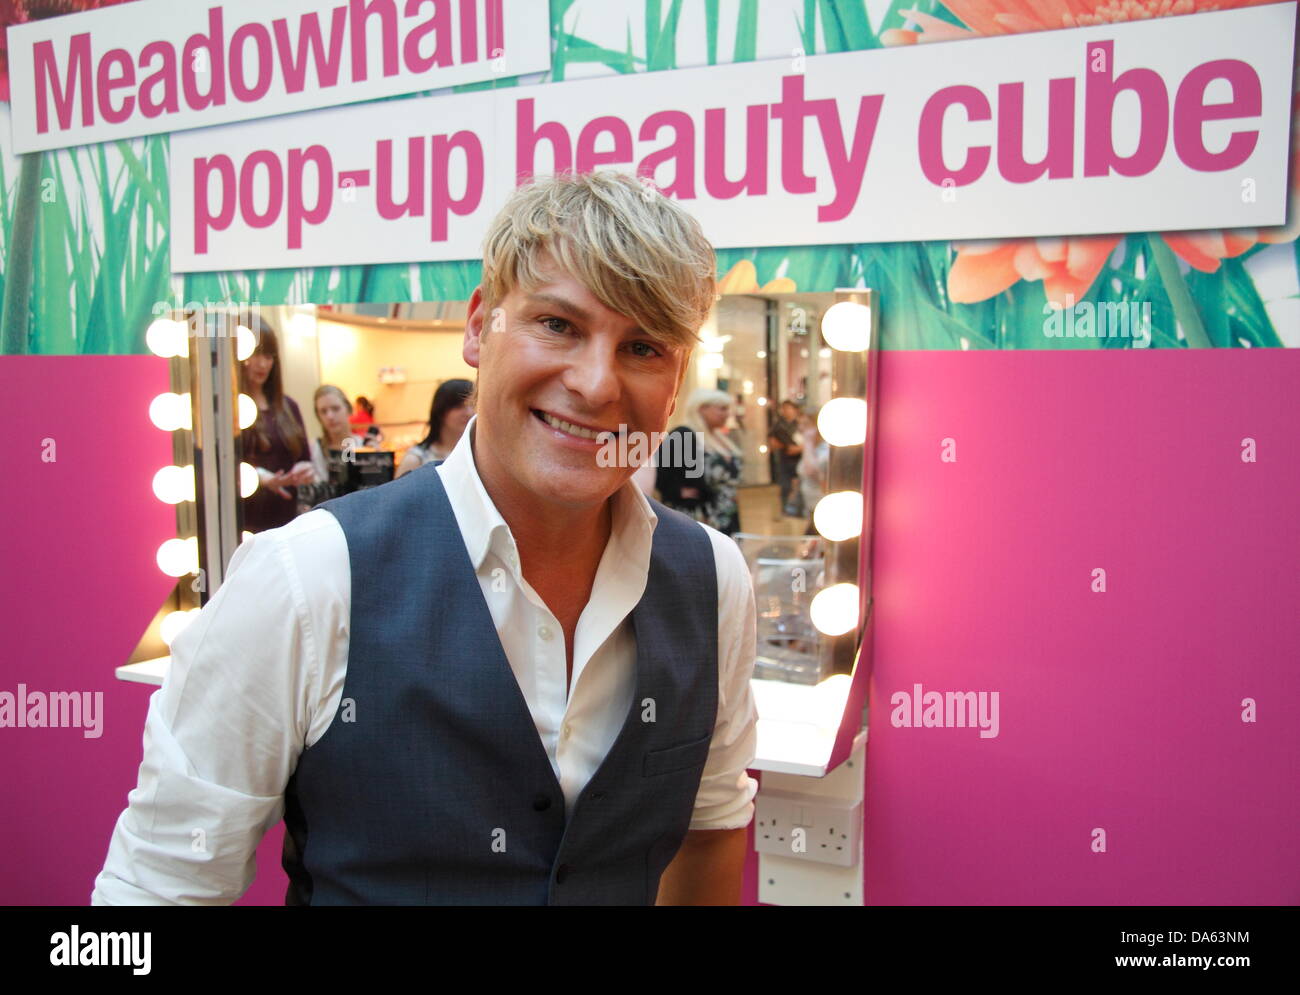 Sheffield, UK. 4th July 2013. Celebrity make up artist, Gary Cockerill presented make-up demonstrations and shared beauty tips at his pop-up beauty cube during the inaugural 'Girls Night In' event, Meadowhall shopping centre. Girls Night In celebrated the Race for Life event held at Meadowhall last month that raised £300,000 for charity, Cancer Research.  Over 6 000 women registered for Girls Night In. The evening featured celebrity events, entertainment, demonstrations, giveaways & offers. Credit:  Deborah Vernon/Alamy Live News Stock Photo